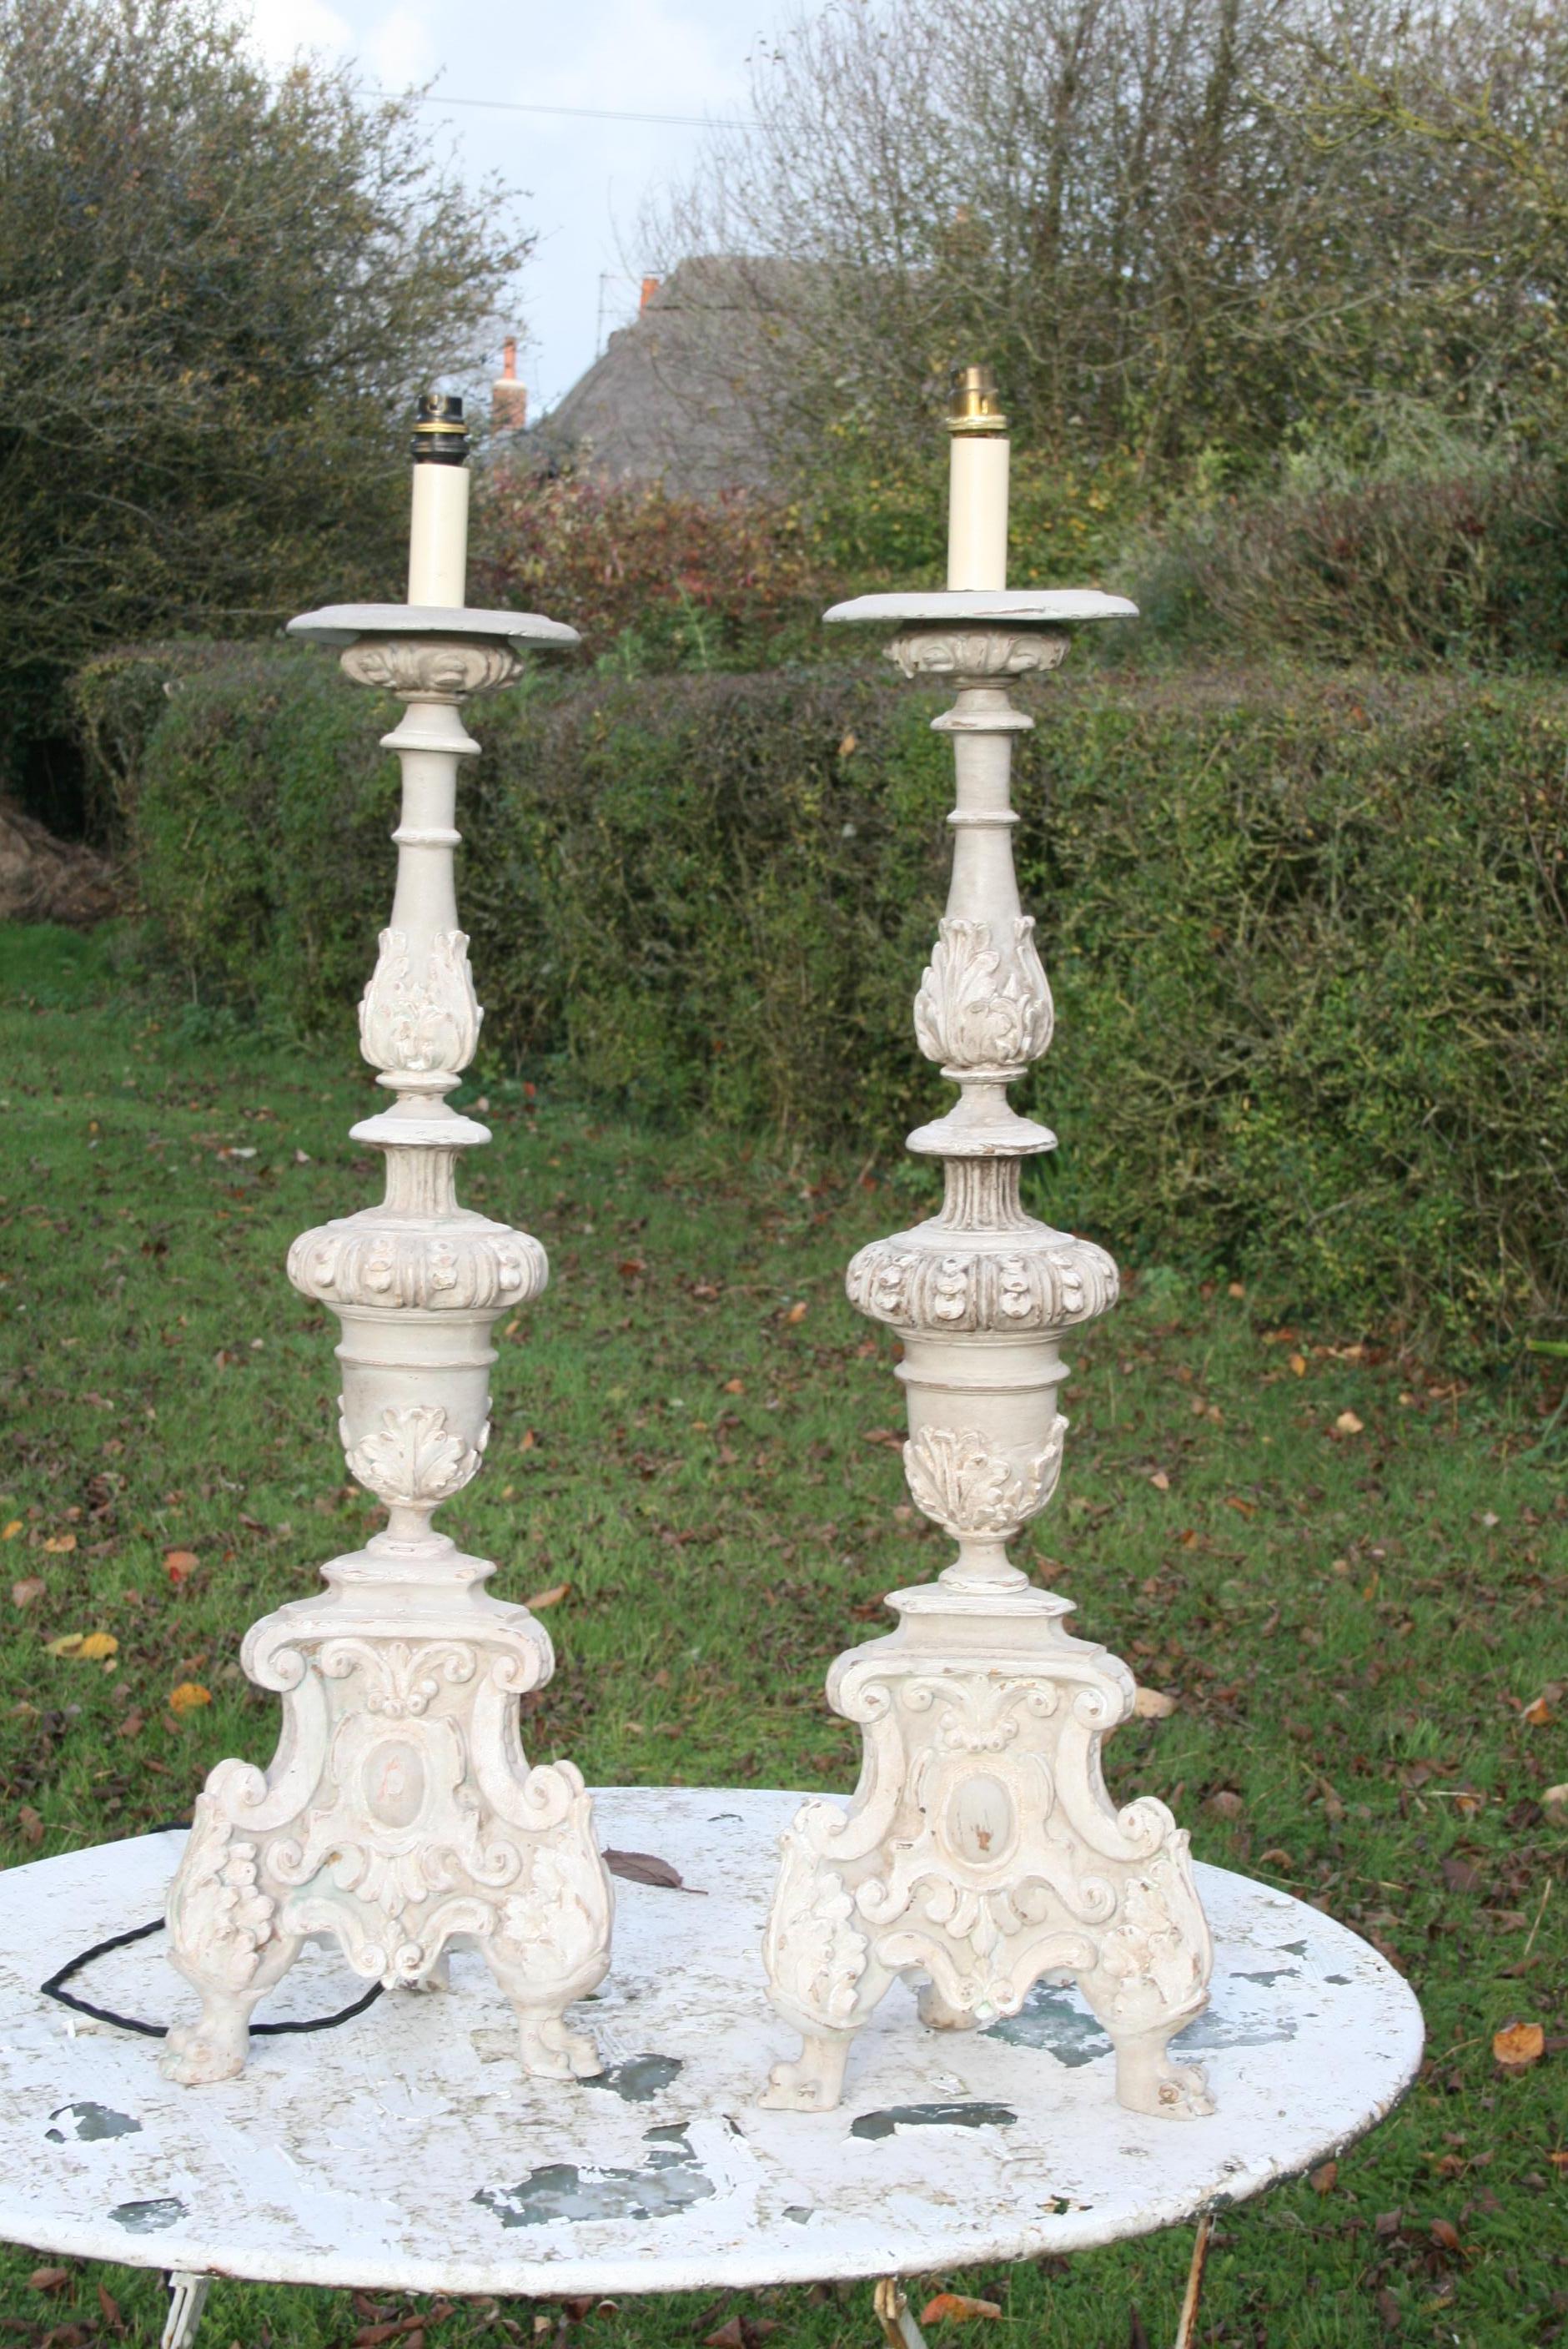 Pair of 19th century large candlesticks or pricketts, in carved wood with crackle finish paint, working order.